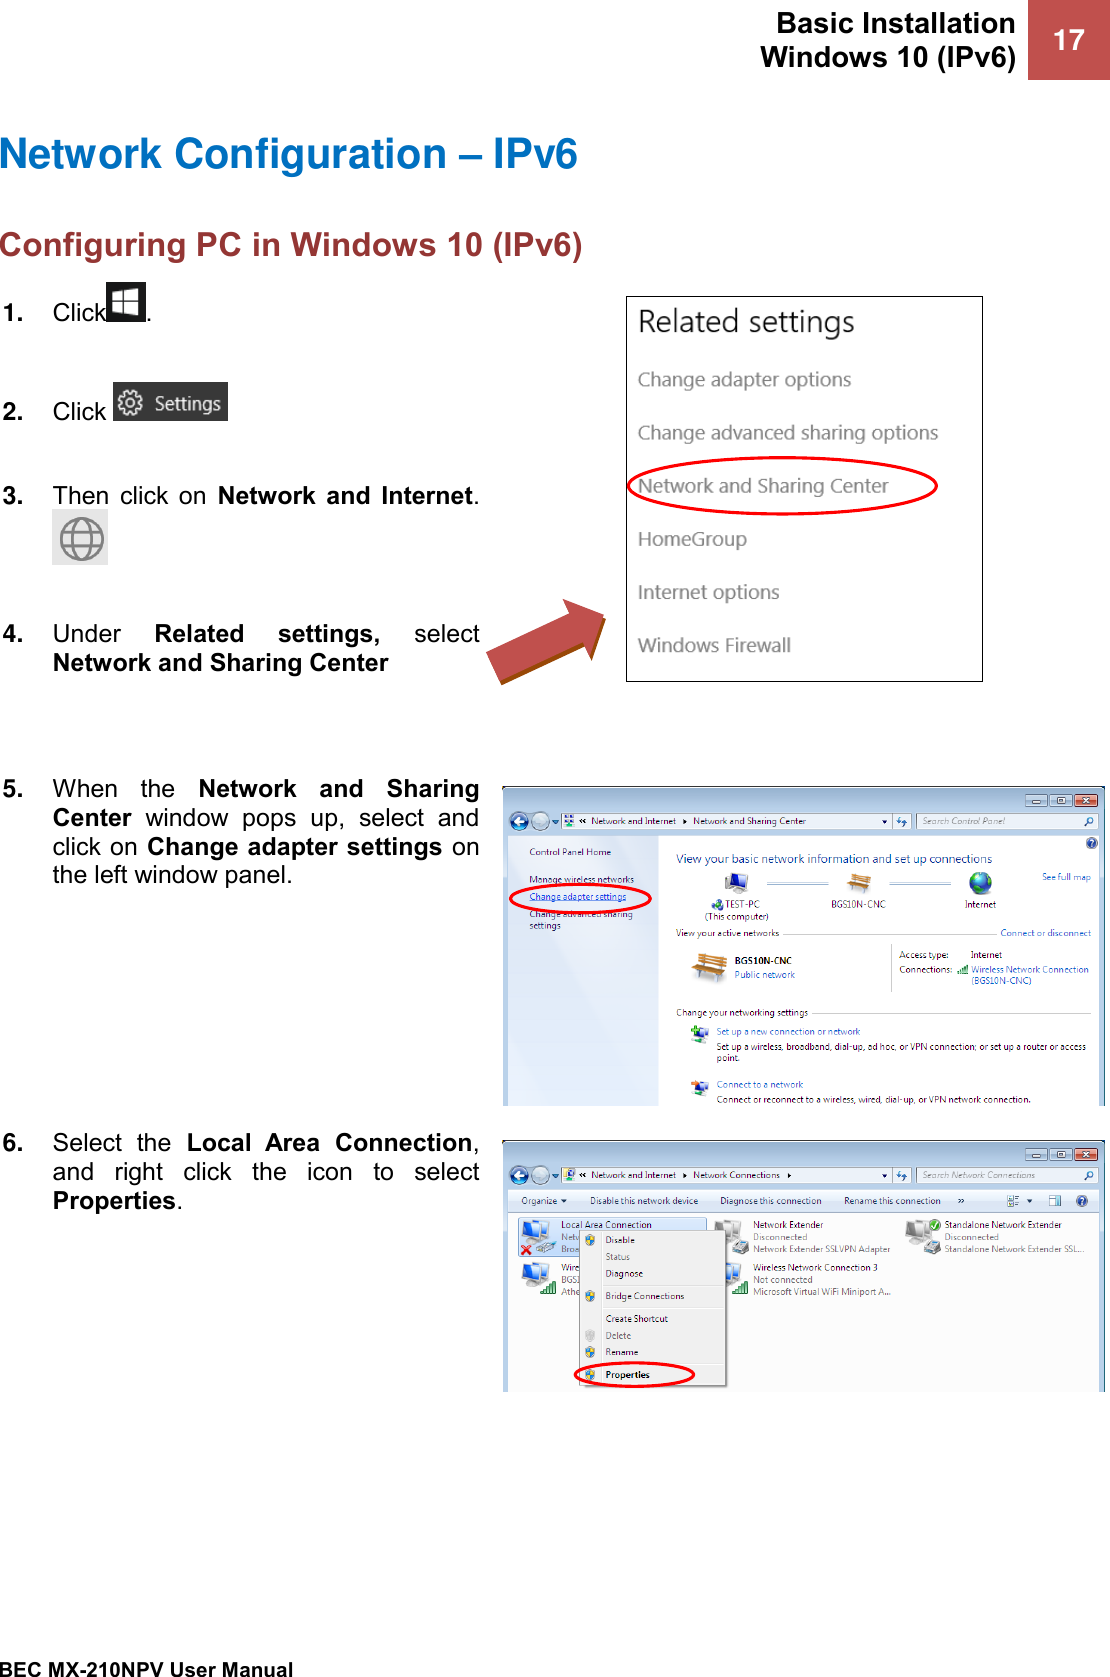 Basic Installation Windows 10 (IPv6) 17   BEC MX-210NPV User Manual  Network Configuration – IPv6 Configuring PC in Windows 10 (IPv6)  1. Click .  2. Click    3. Then  click  on  Network  and  Internet.   4. Under  Related  settings,  select Network and Sharing Center    5. When  the  Network  and  Sharing Center  window  pops  up,  select  and click on Change adapter settings on the left window panel.  6. Select  the  Local  Area  Connection, and  right  click  the  icon  to  select Properties.  